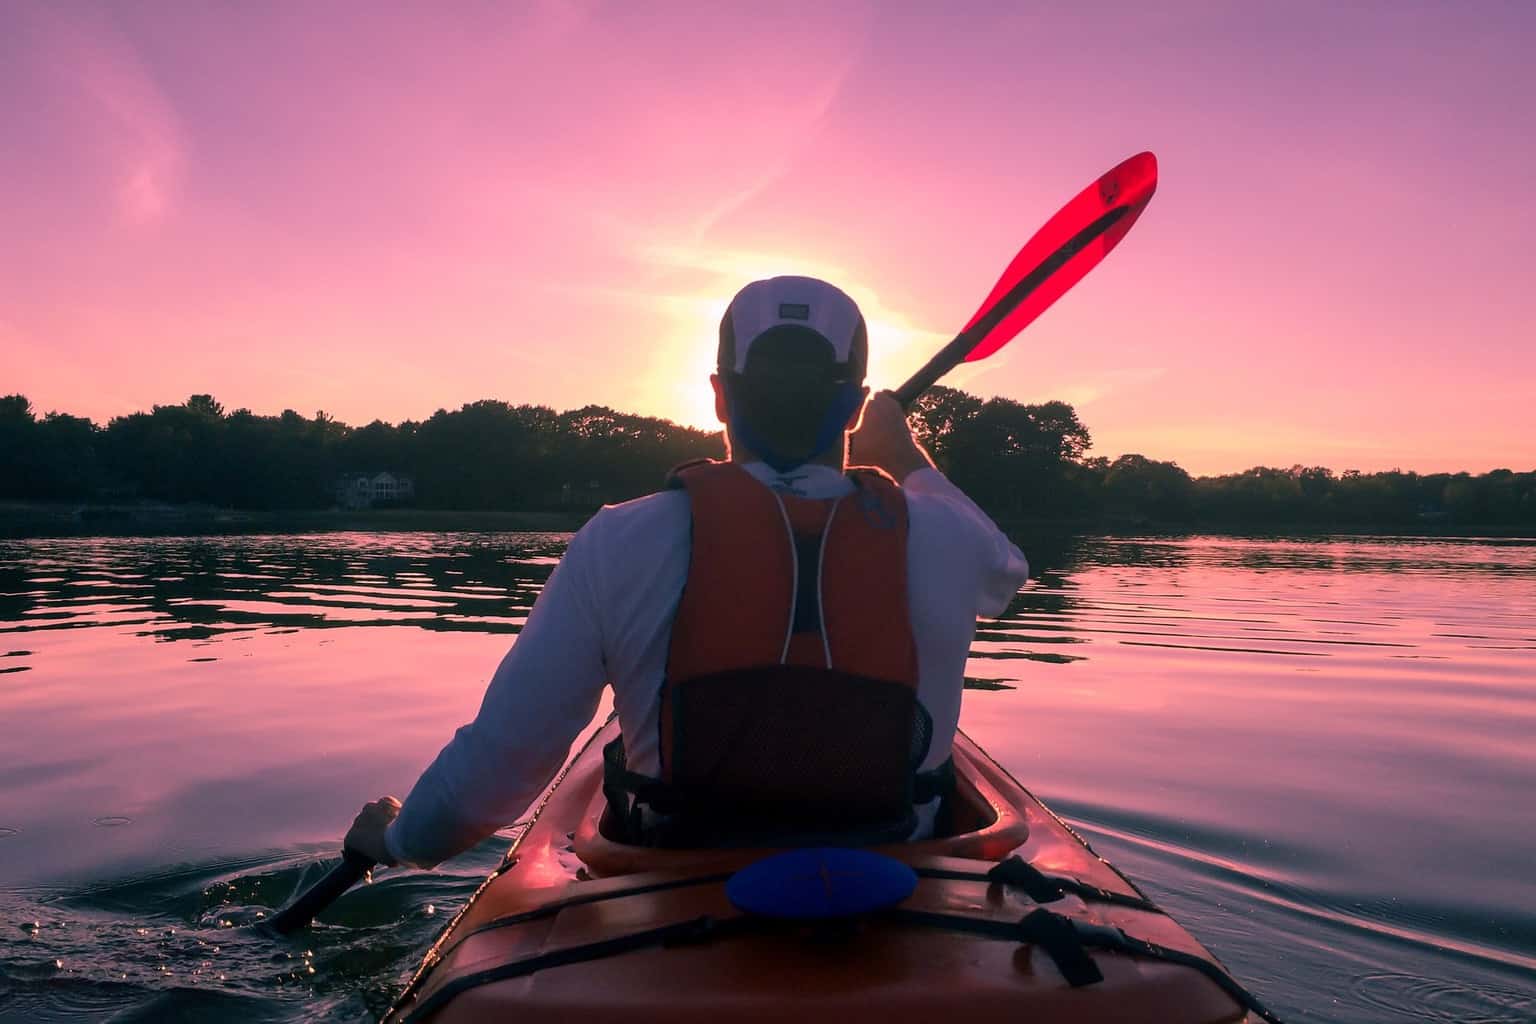 Does Kayaking Need Training? (Important Facts You Should Know)